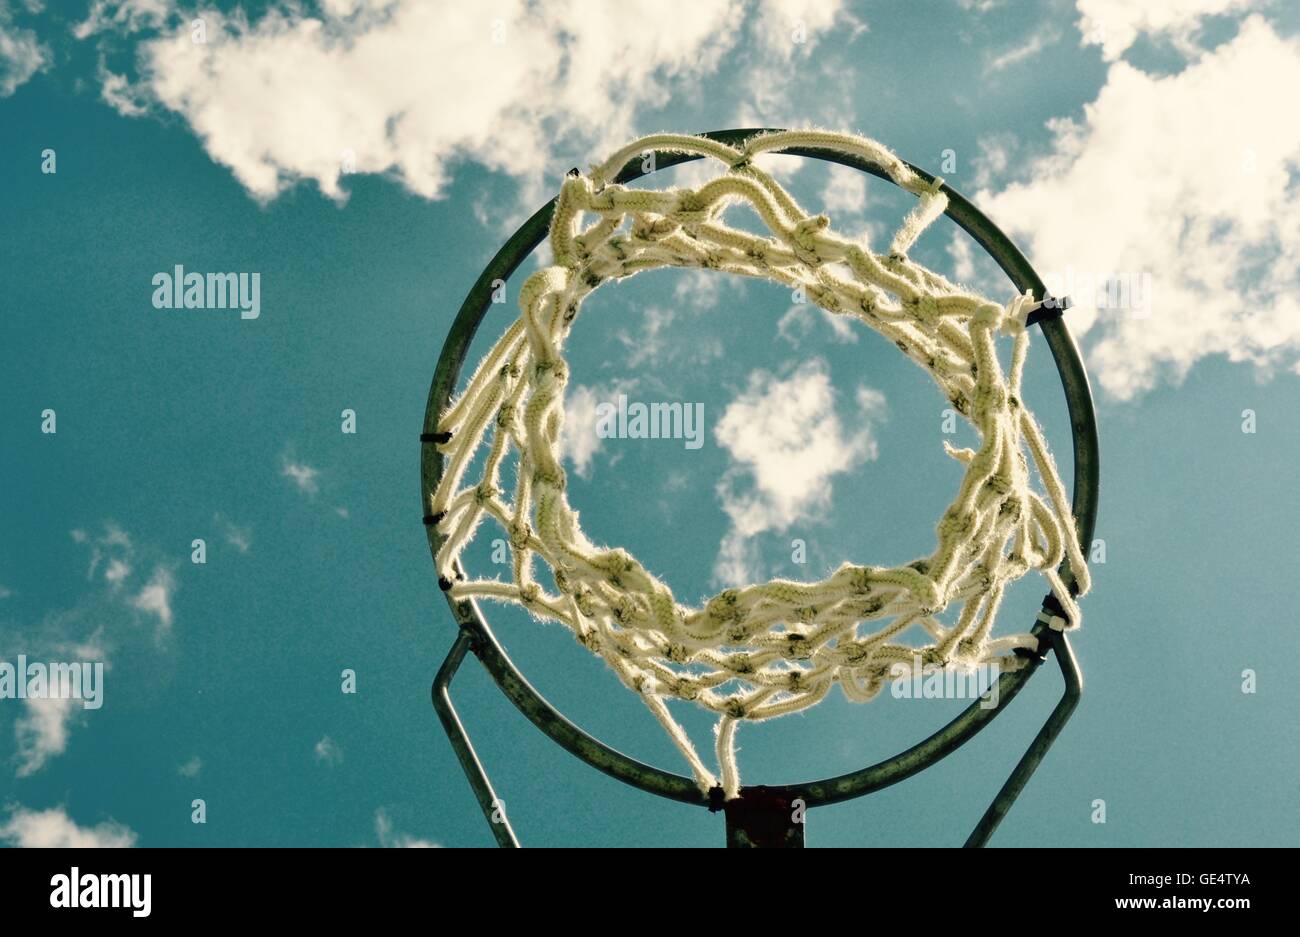 Abstract perspective of a netball rim with net against a blue sky and cloud background. Stock Photo